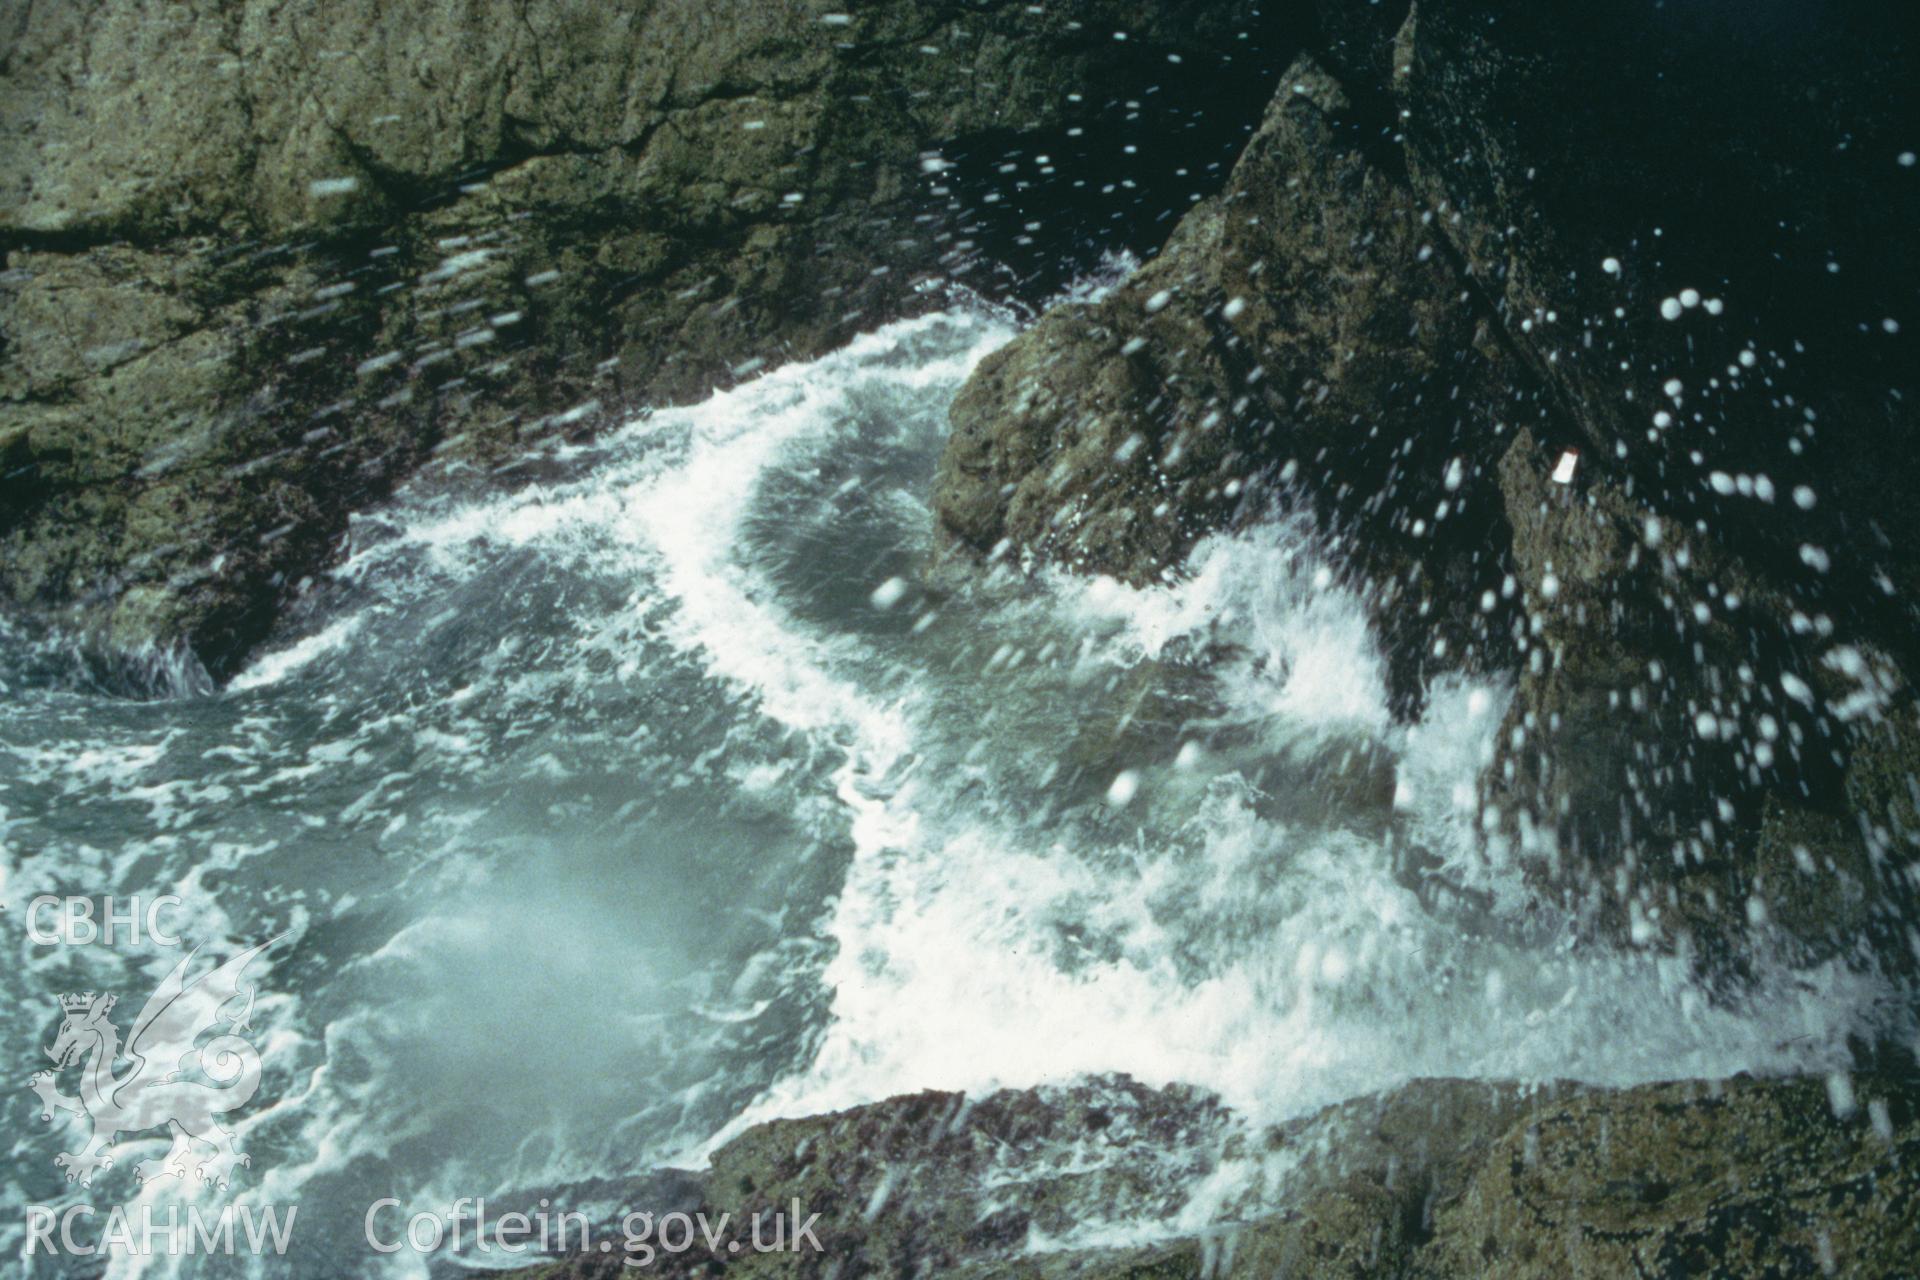 Colour slide of the the vicinity of the wreck site, close-up of rocks, from a survey of the Mary designated shipwreck, courtesy of National Museums, Liverpool (Merseyside Maritime Museum)